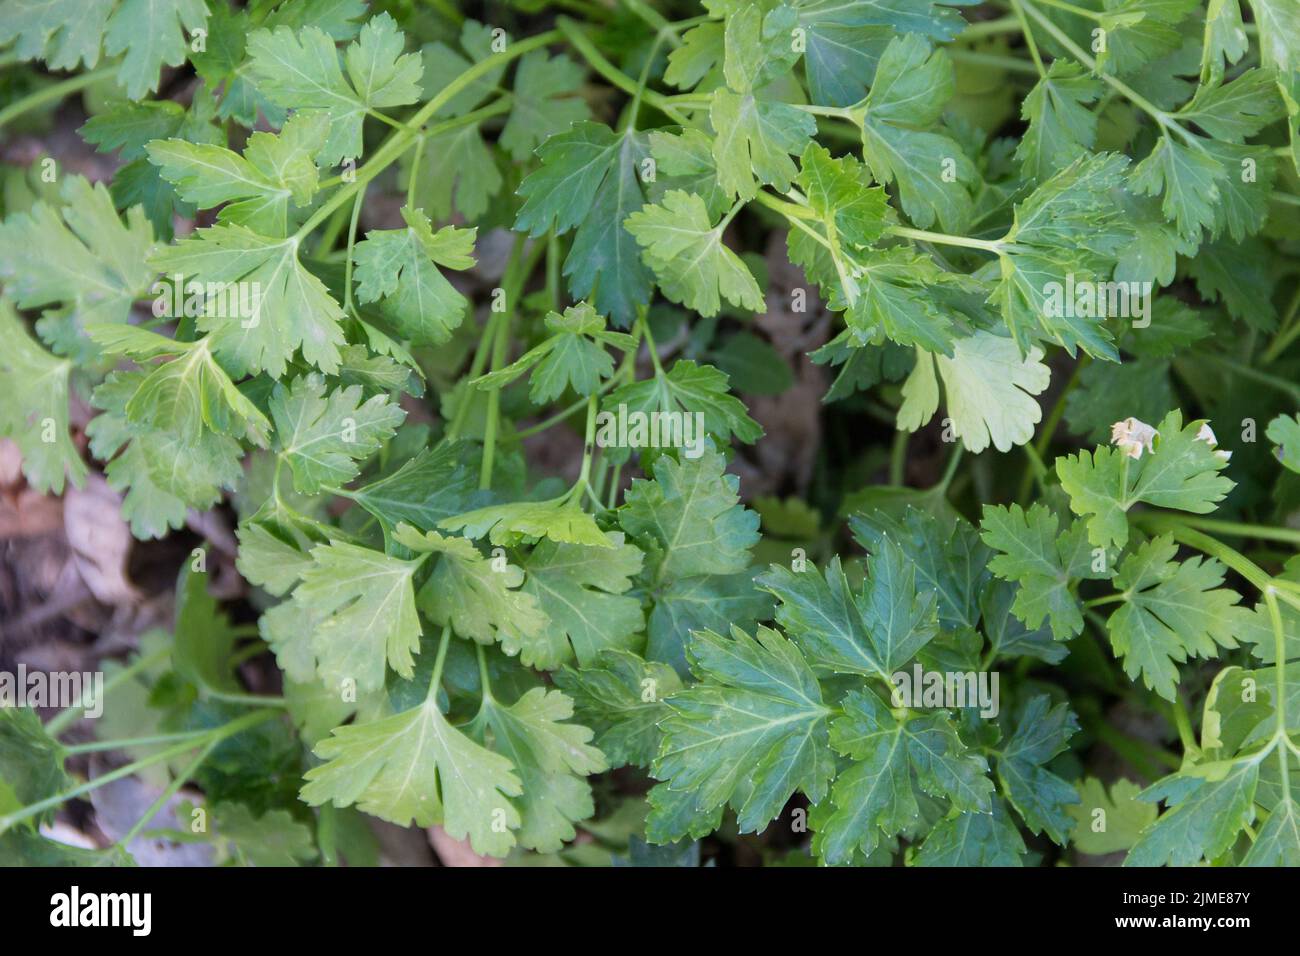 Parsley plant grown in the organic garden Stock Photo